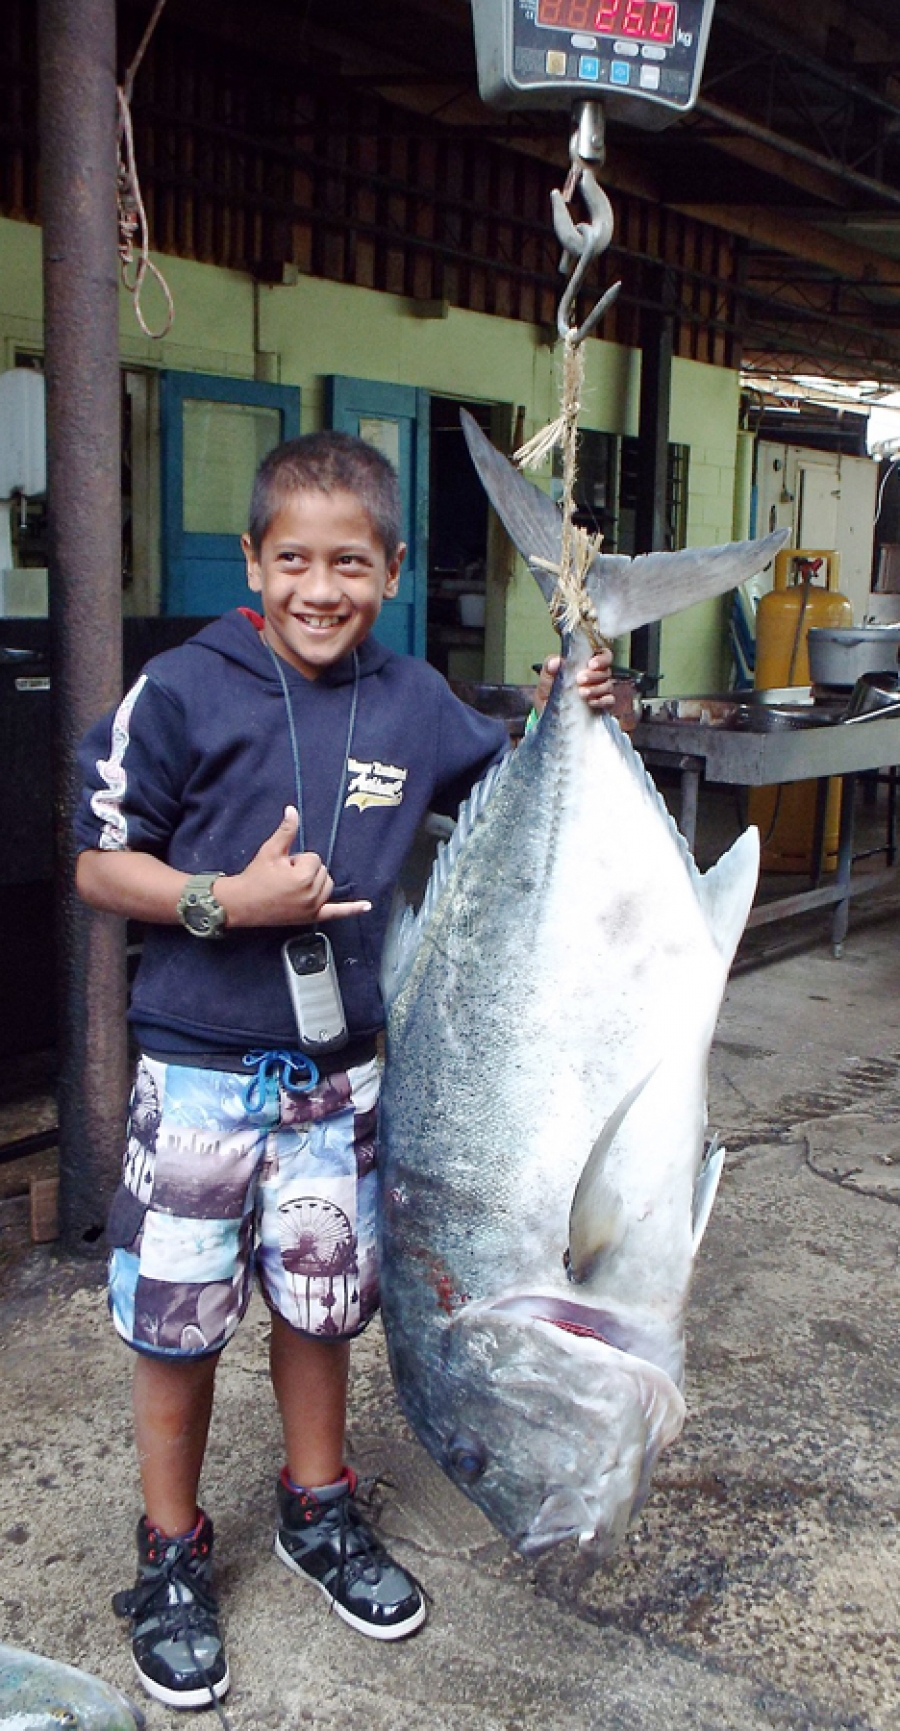 Contest encourages young to go fishing